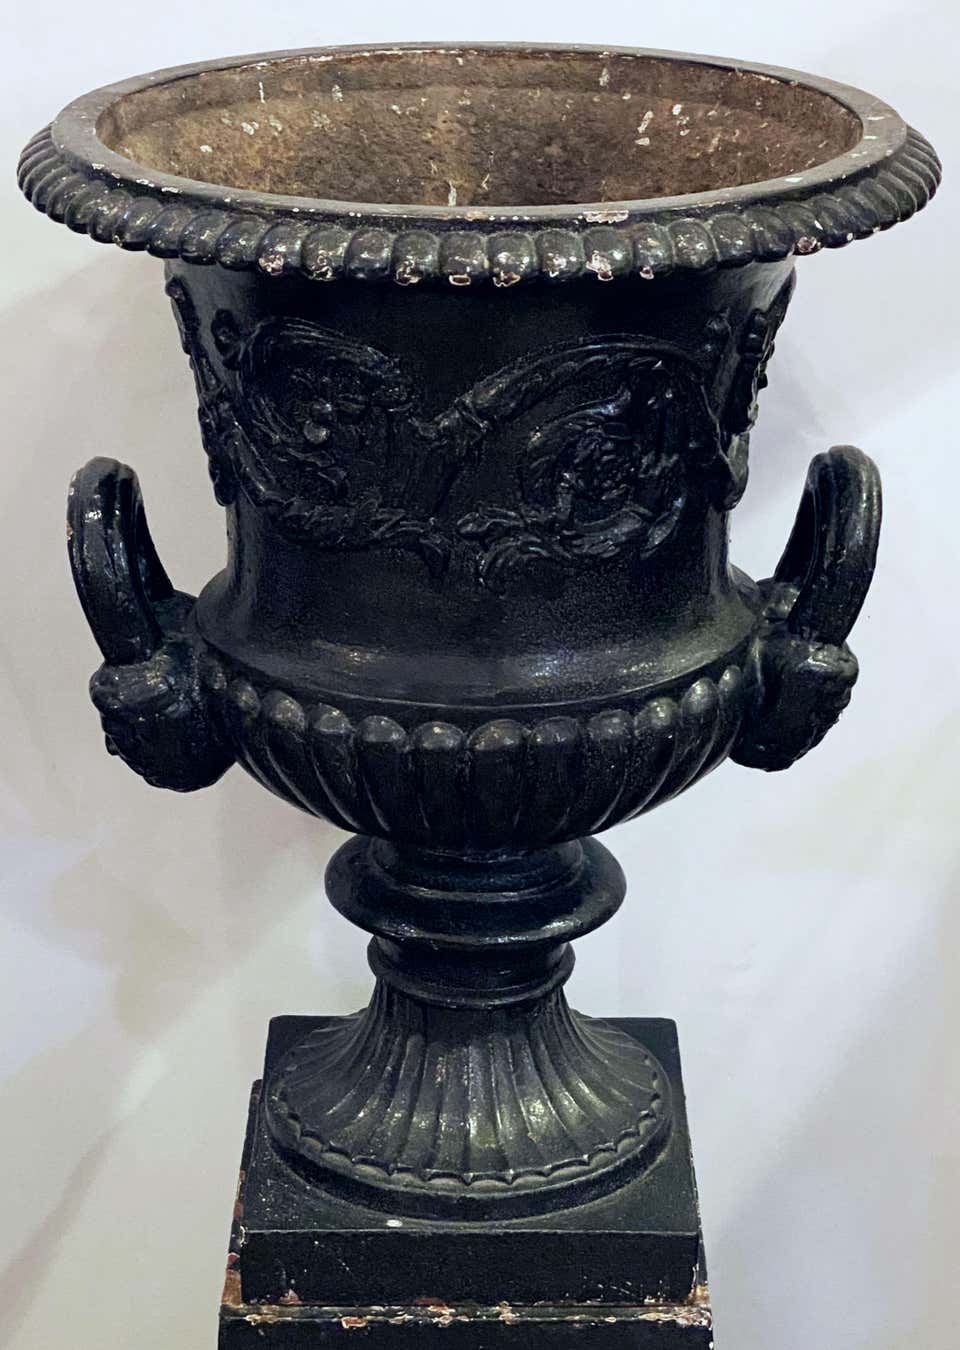 English Cast Iron Urns on Plinths from the Regency Era - Individually